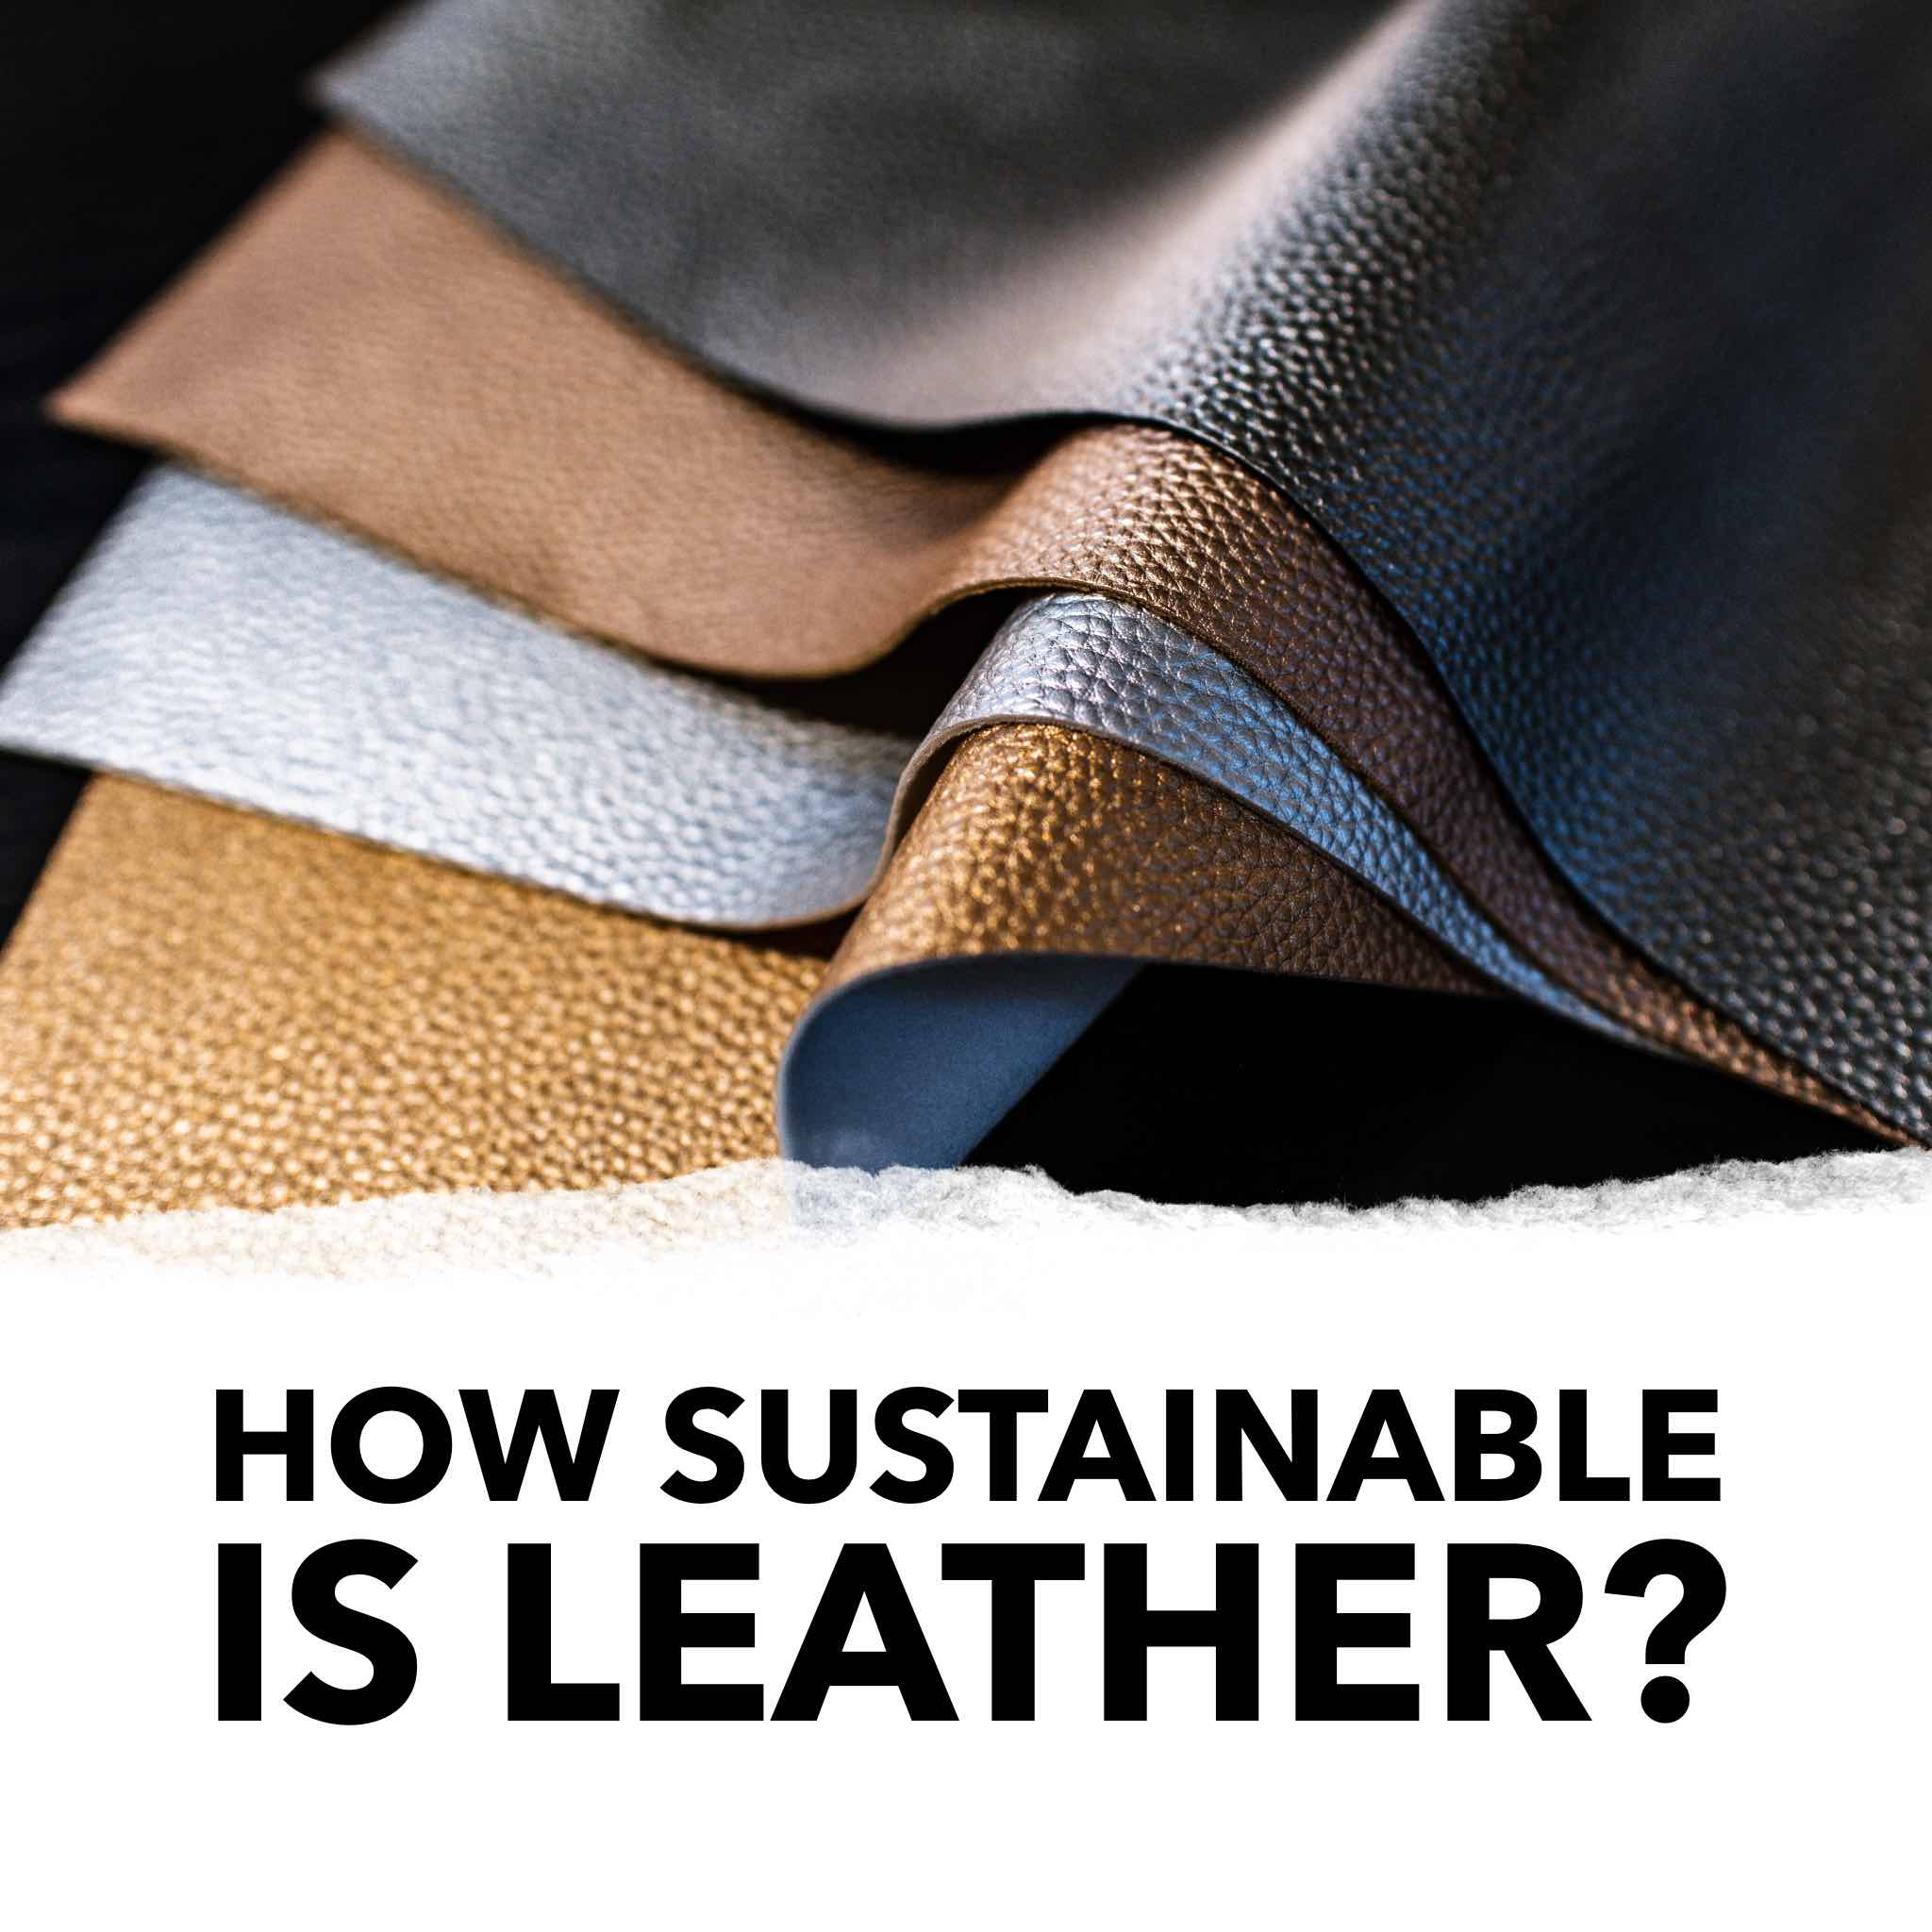 How sustainable is leather lets discuss